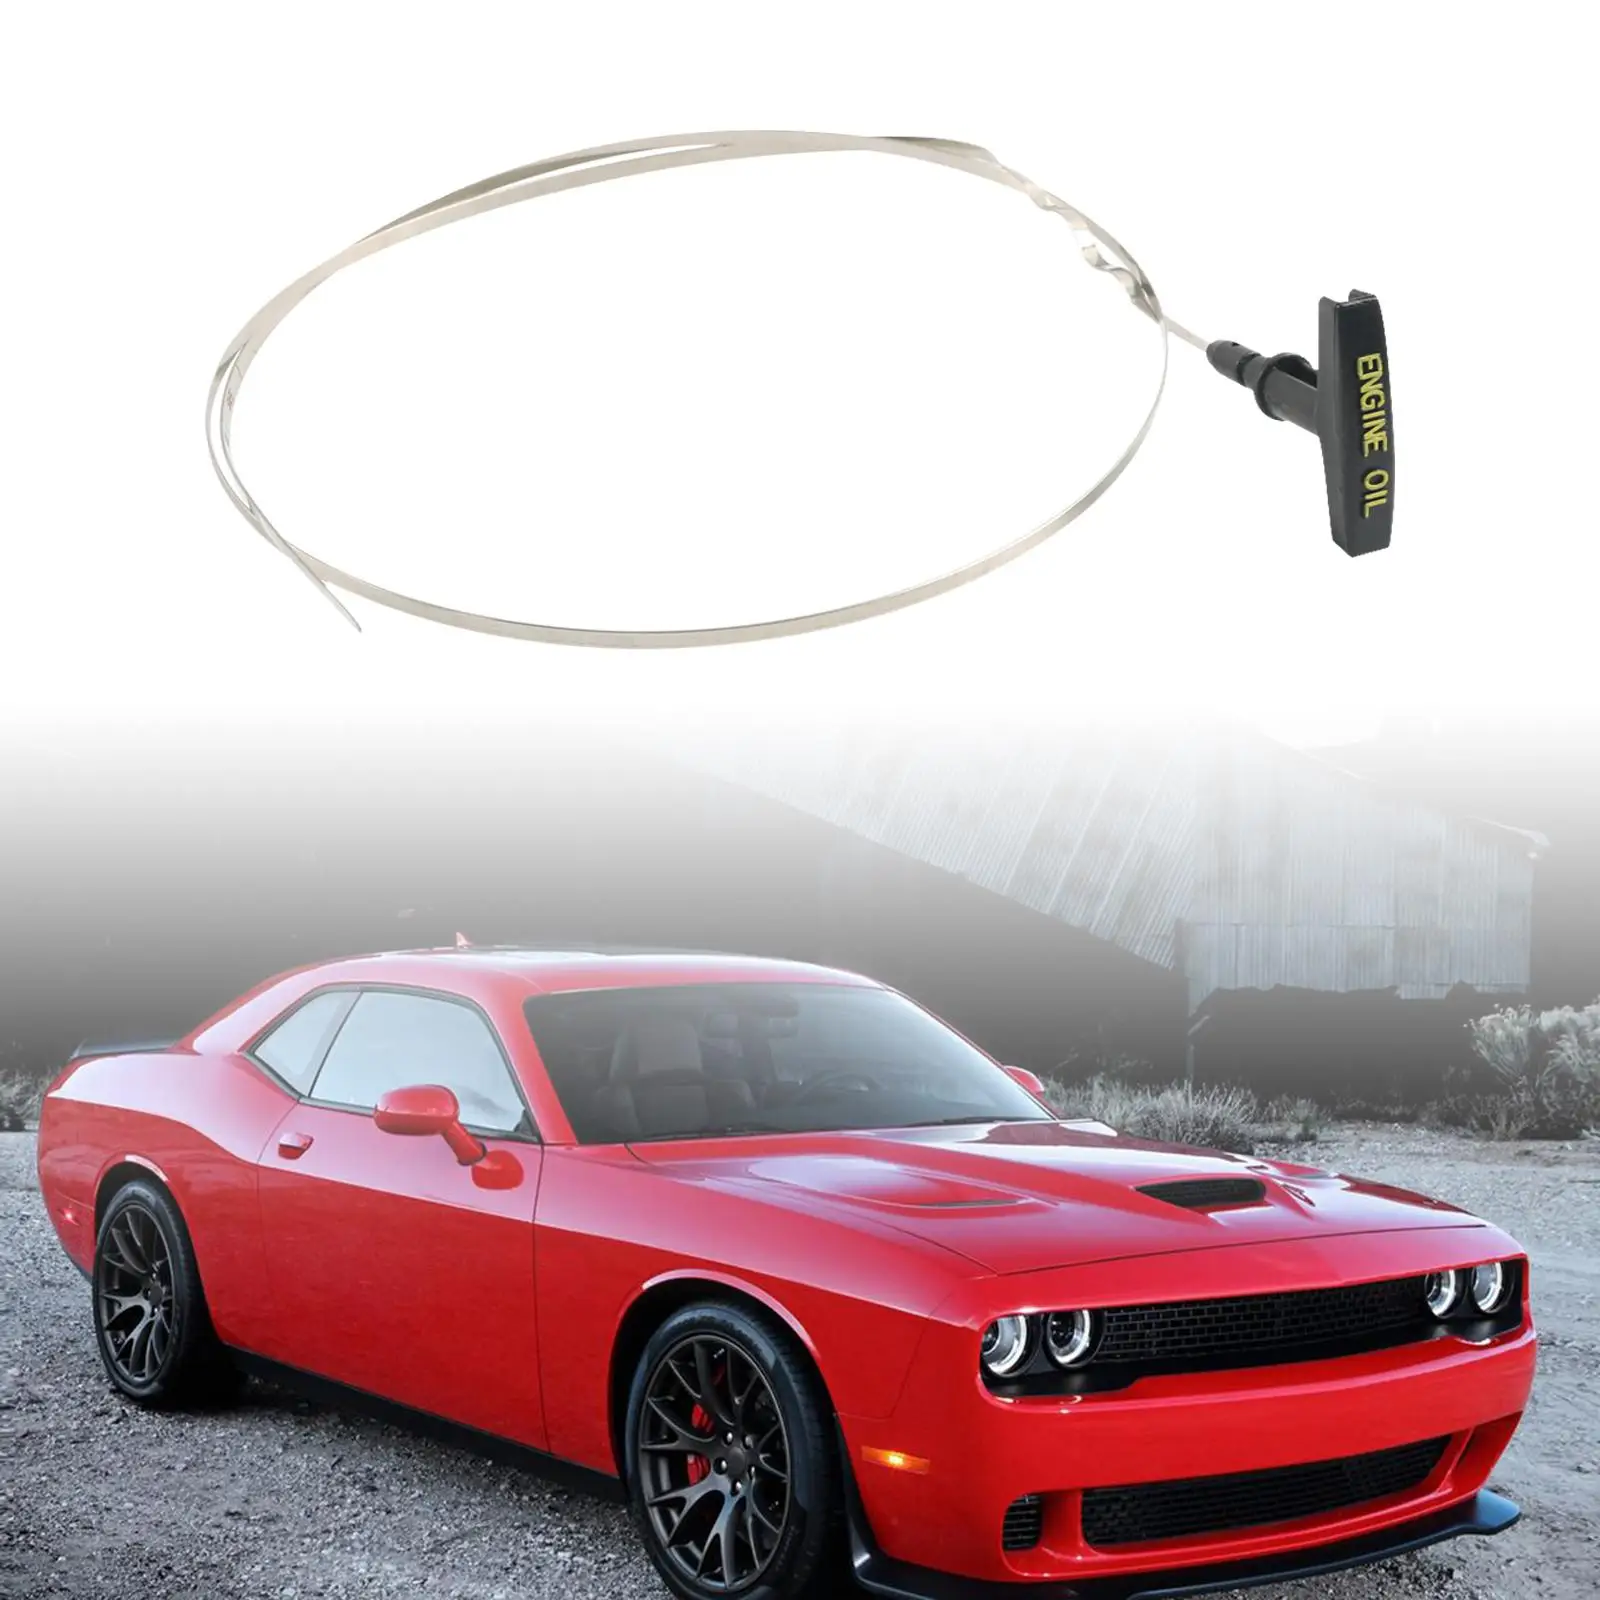 Engine Oil Level Indicator Dipstick Professional Easy to Install Replaces Car Engine Oil Level Gauge Dipstick for Dodge